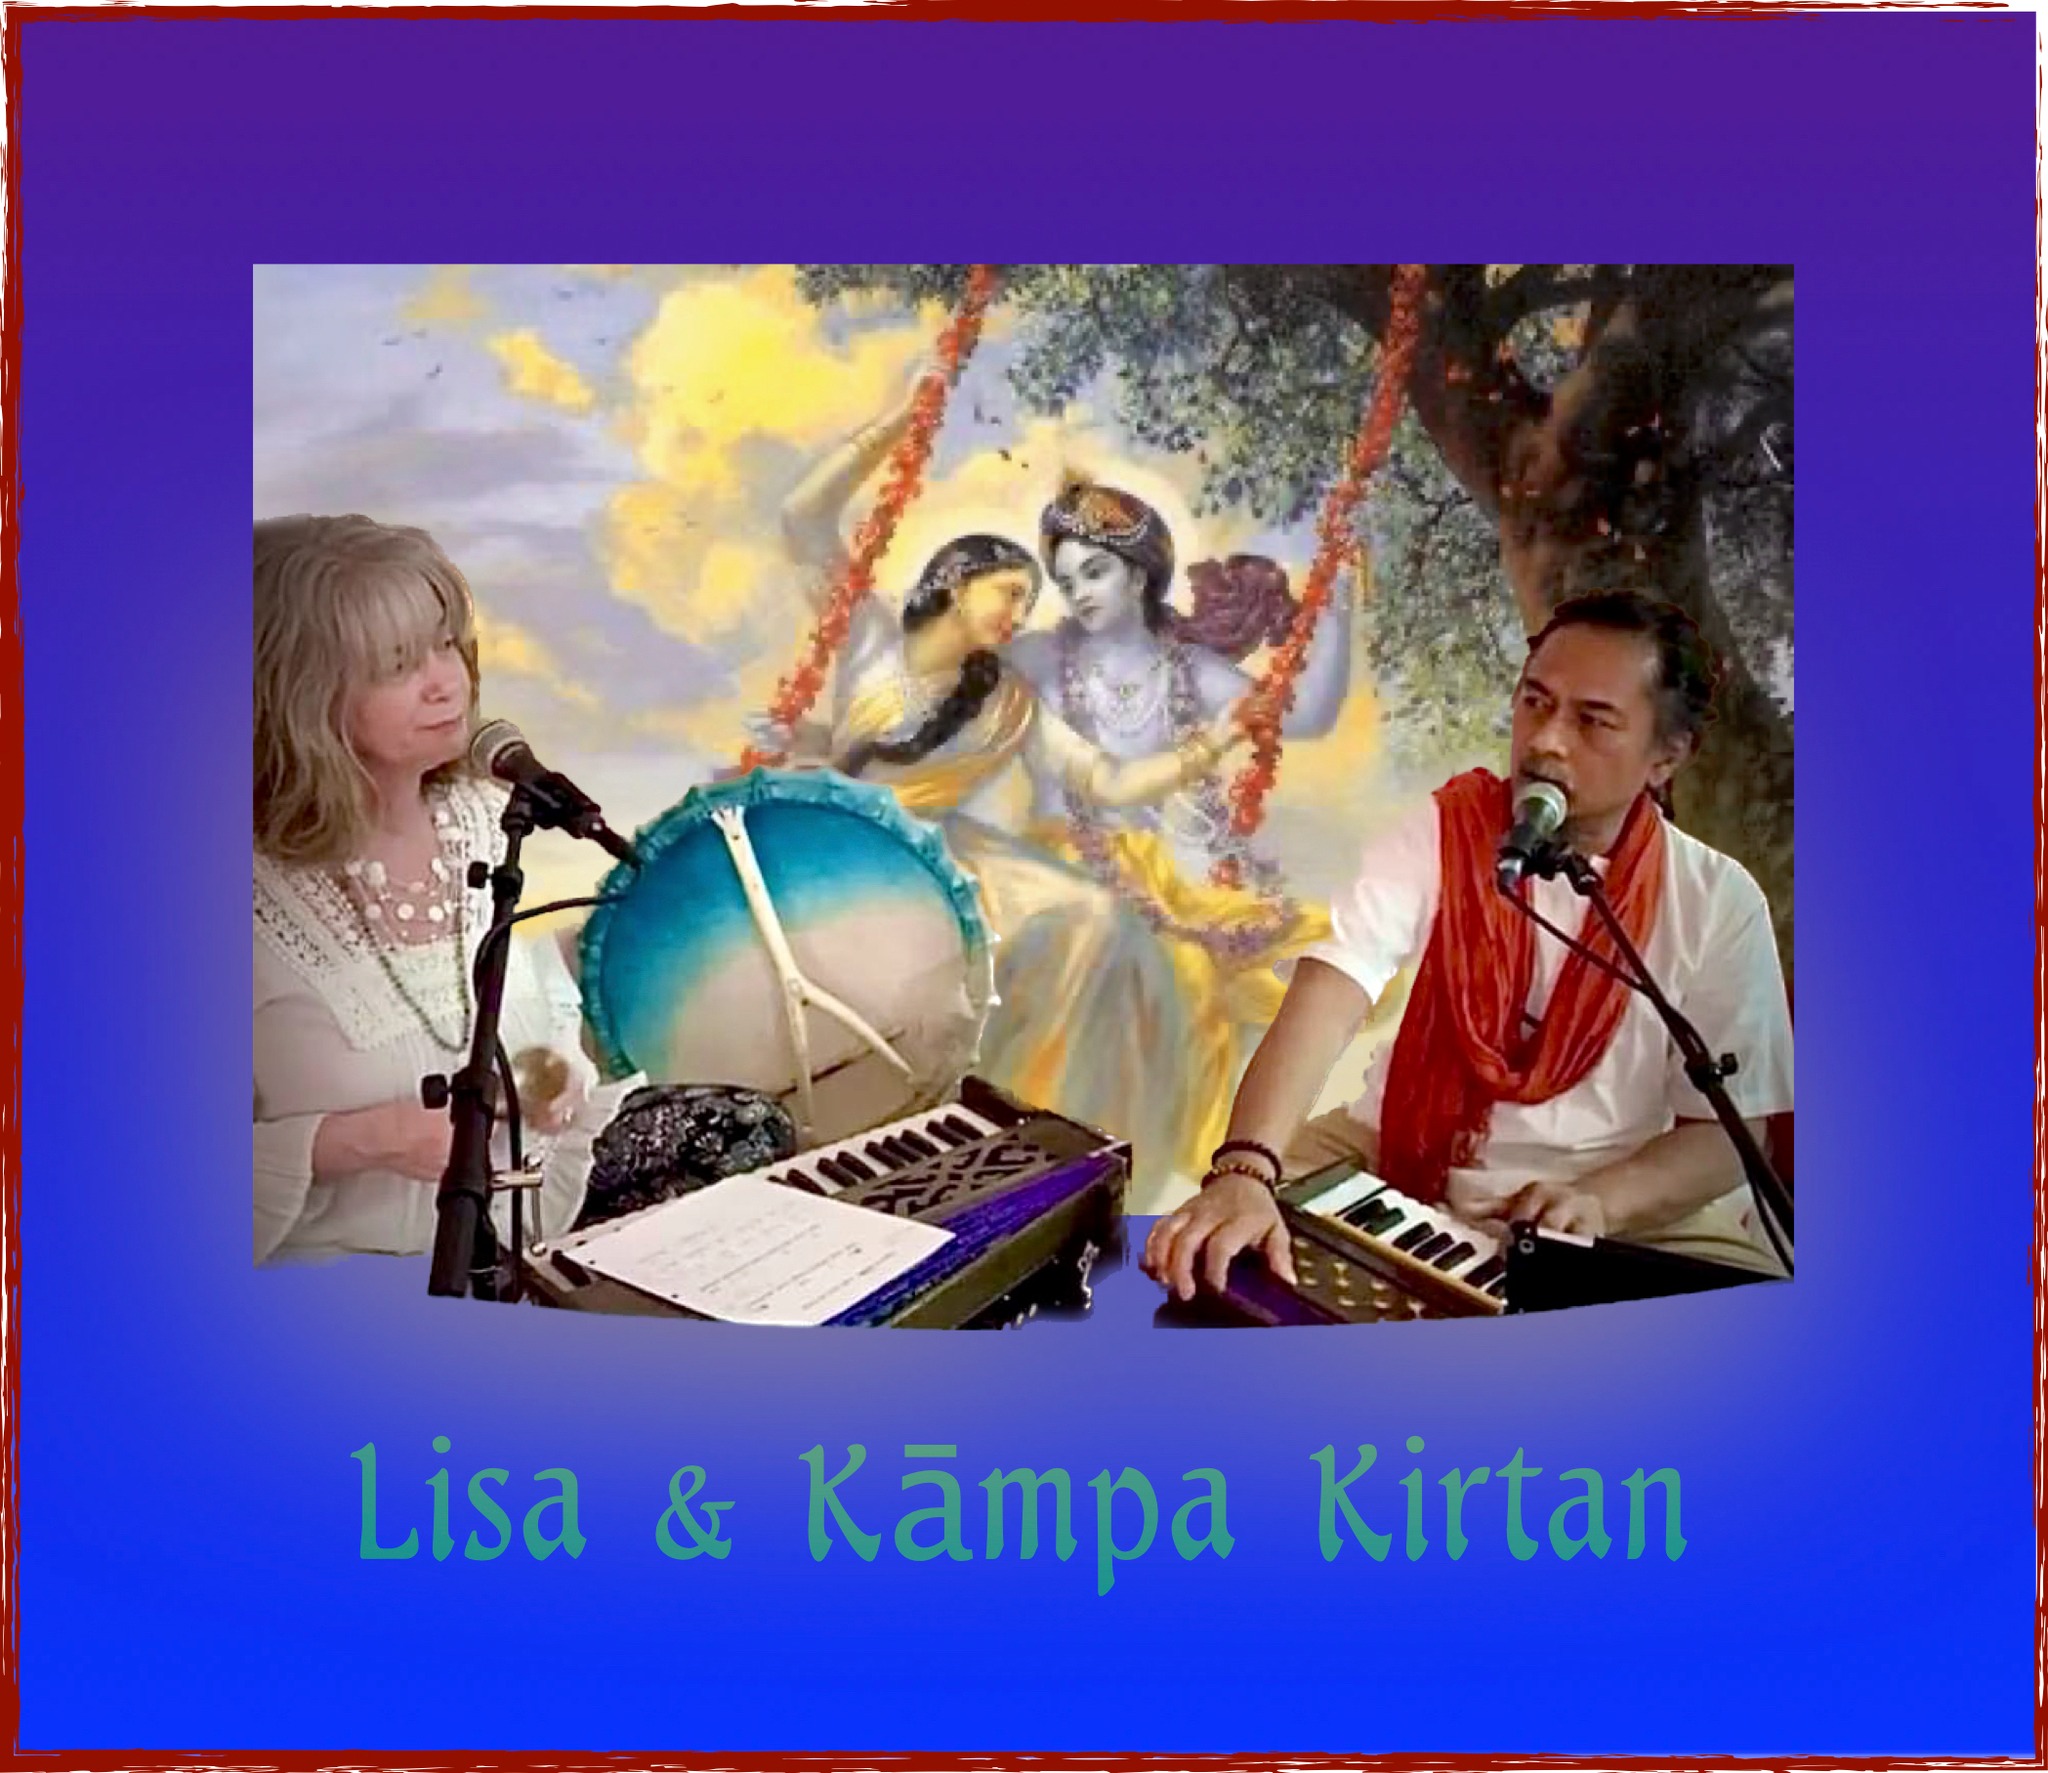 Two individuals engaged in a kirtan, with one man playing the soulful melodies of a harmonium and a woman beating rhythmic tunes on the drum. The background displays an uplifting spiritual scene, adding to the serene ambiance.